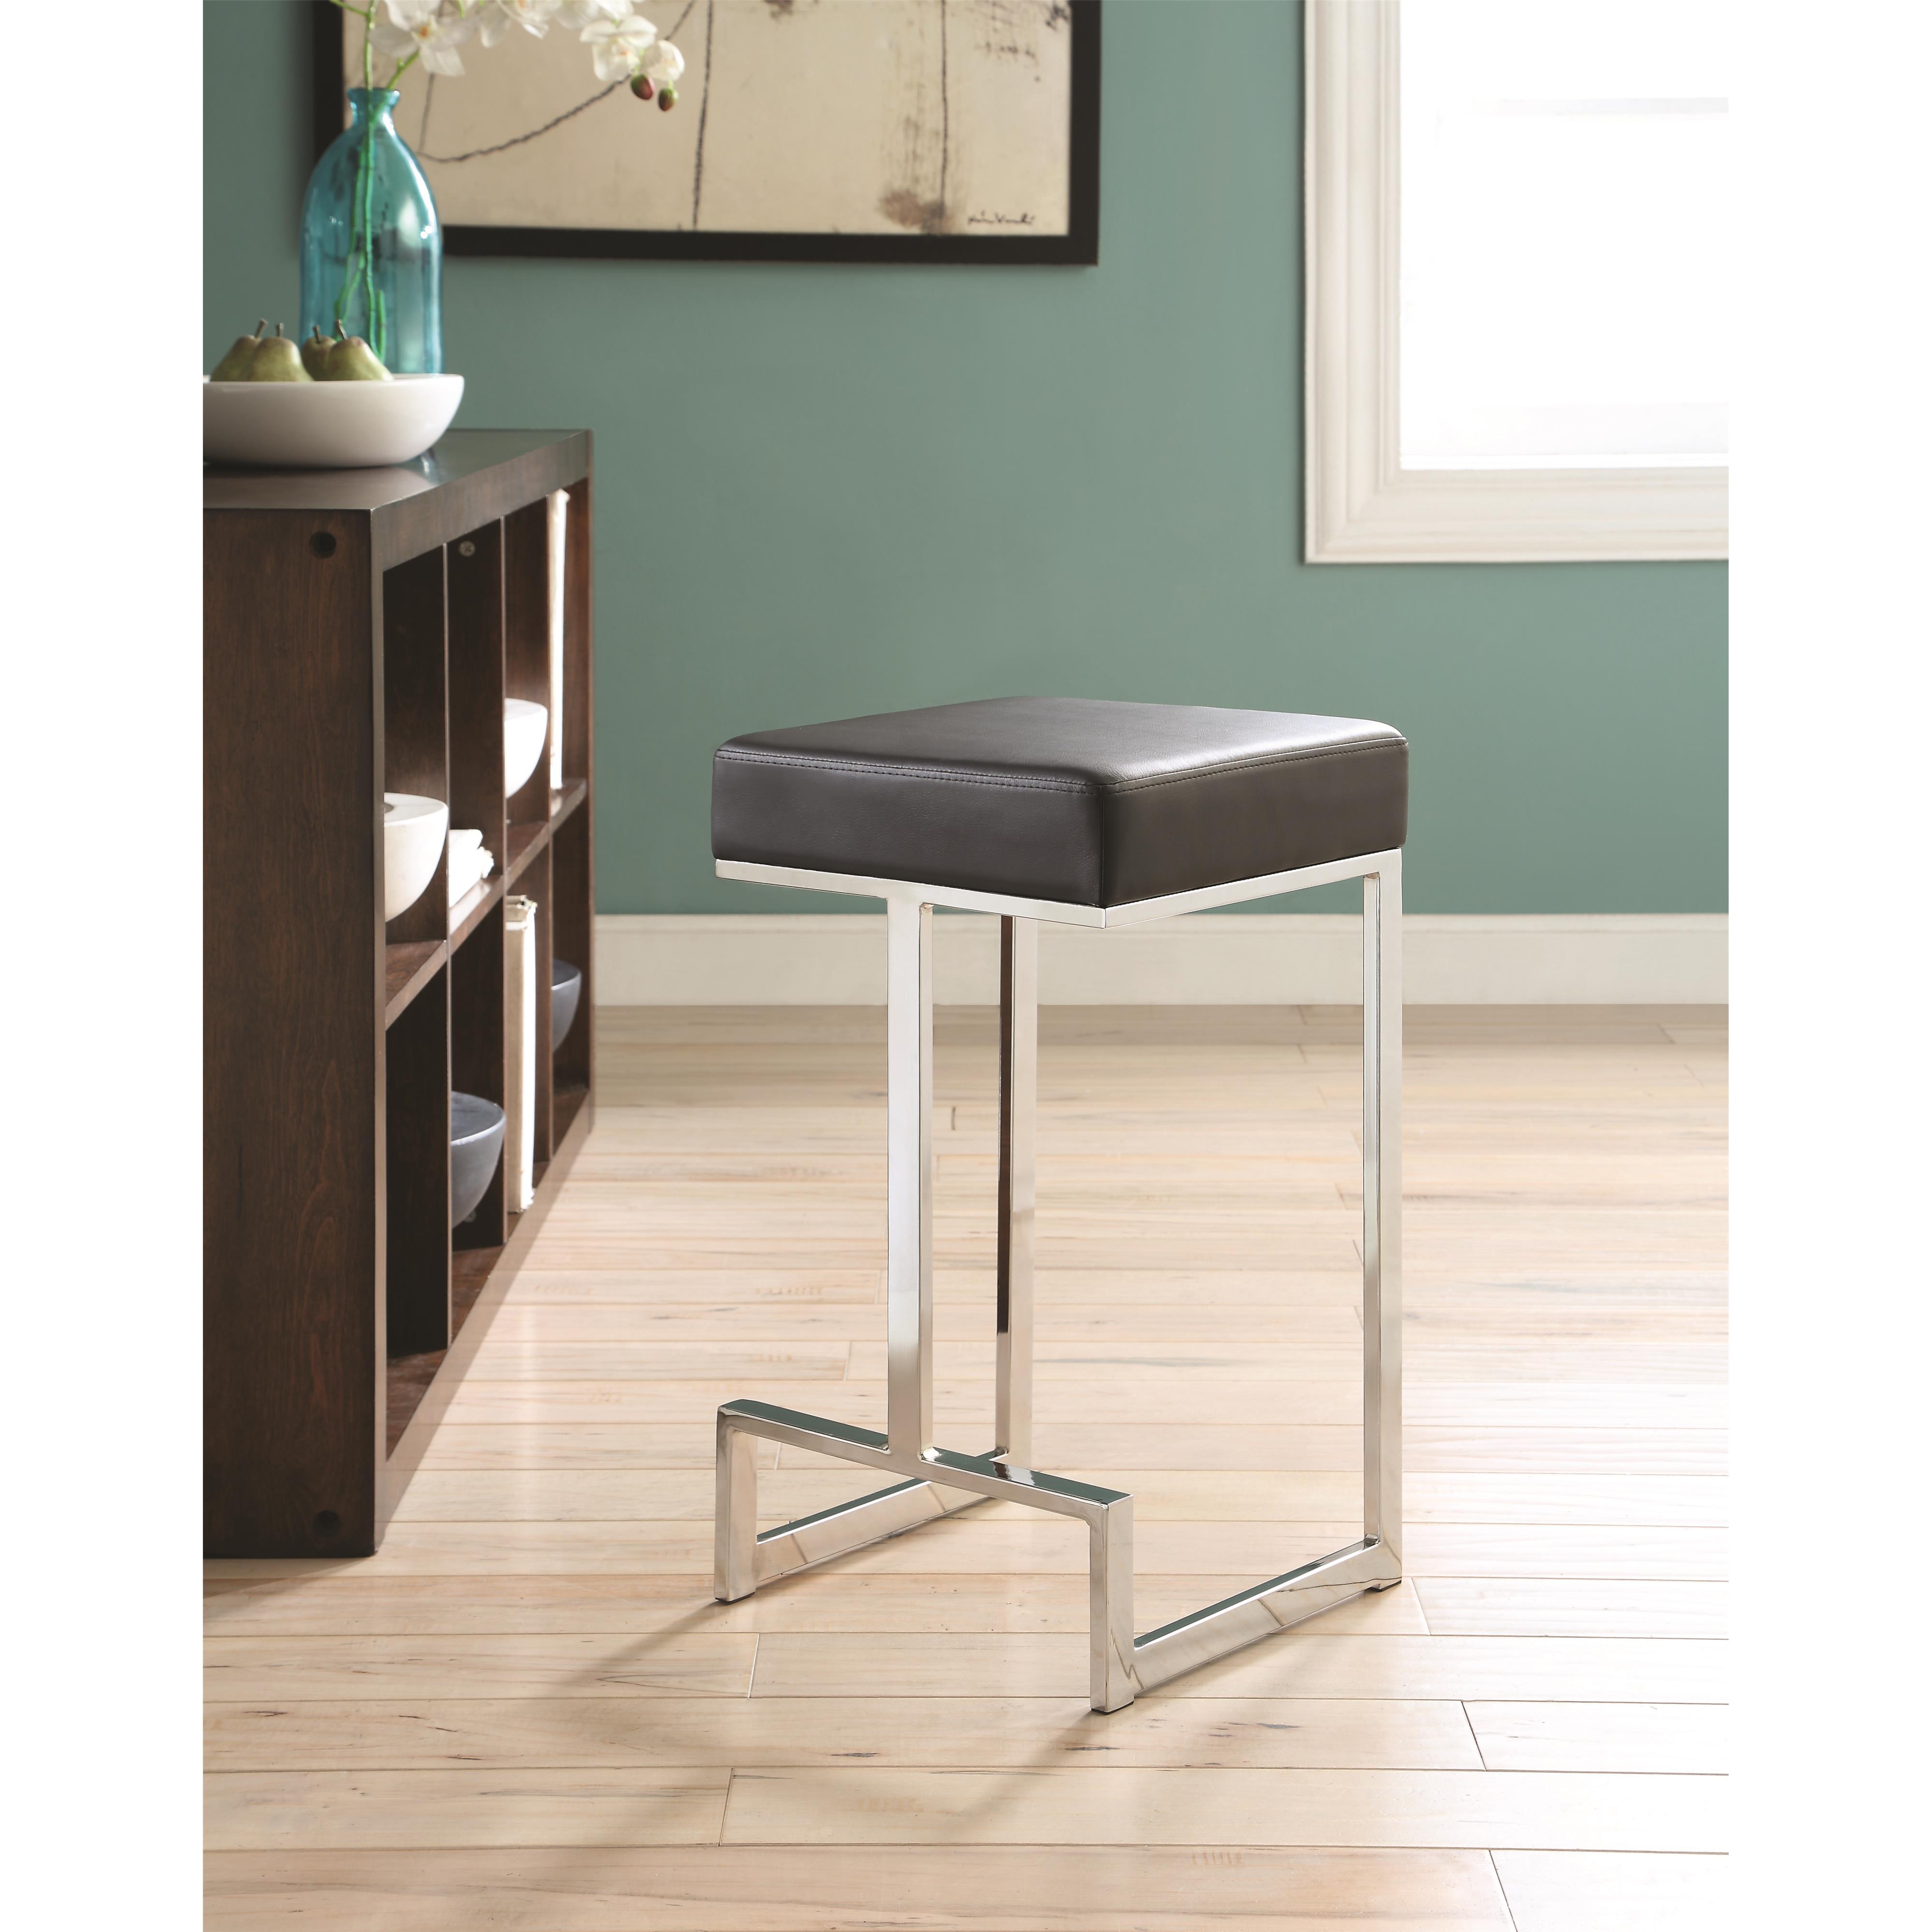 Contemporary Counter Height Stool, Contemporary Counter Height Bar Stools